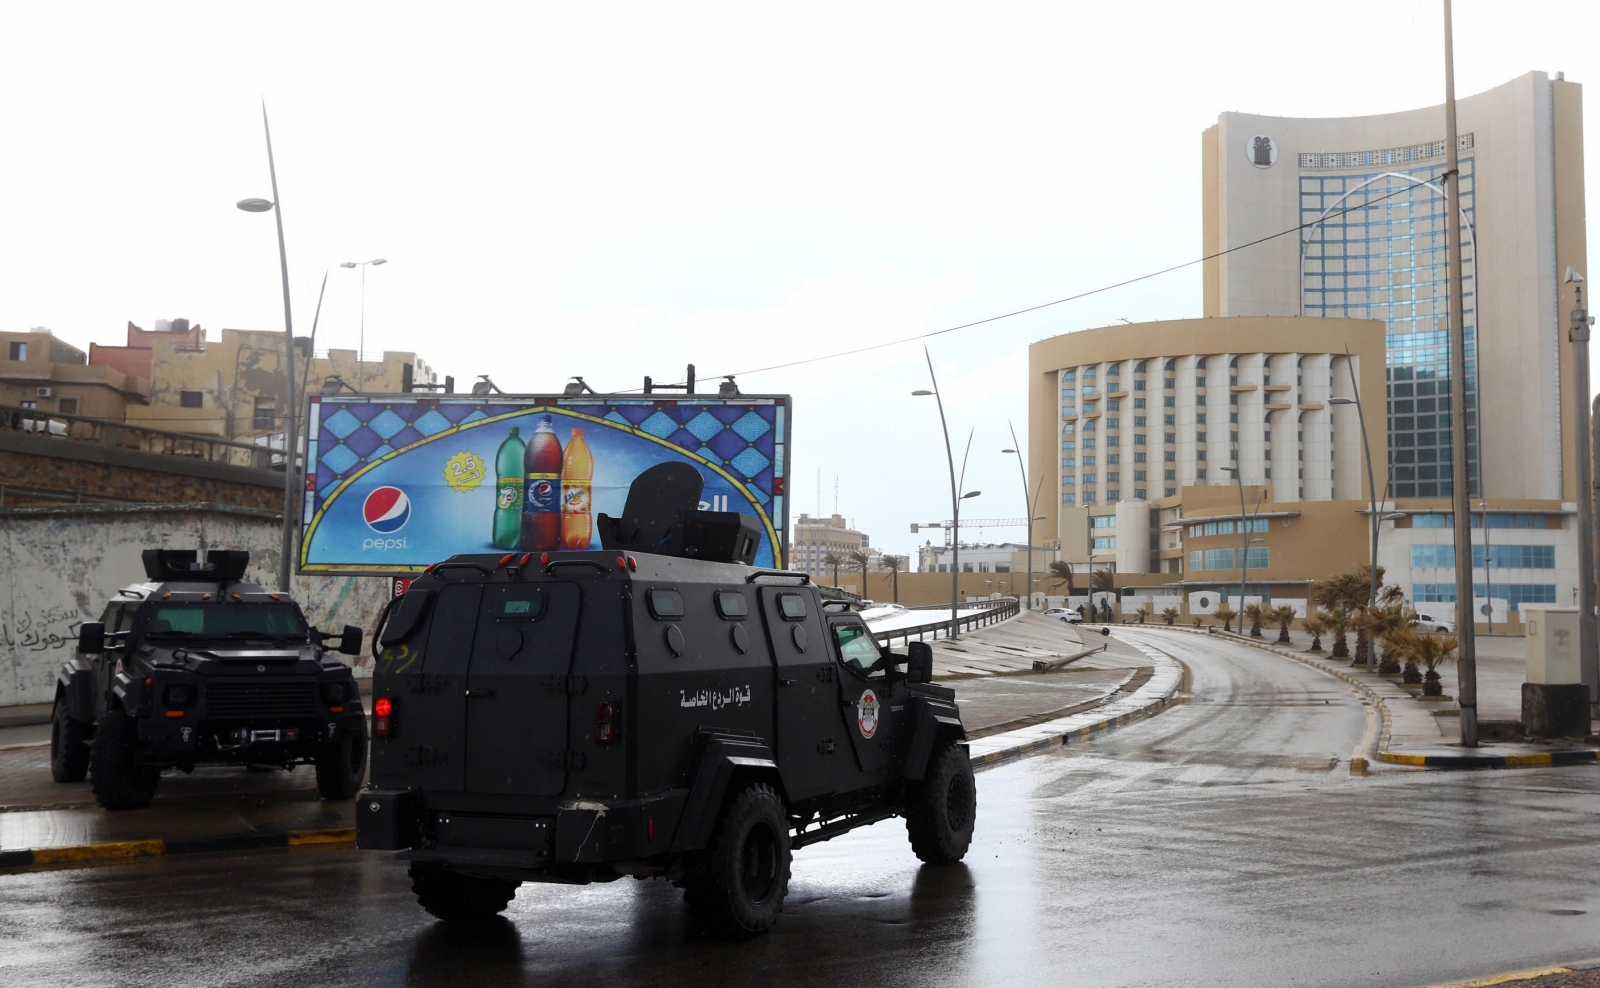 Libyan security forces and emergency services surround Tripoli's central Corinthia Hotel (R) on January 27, 2015 in the Libyan capital